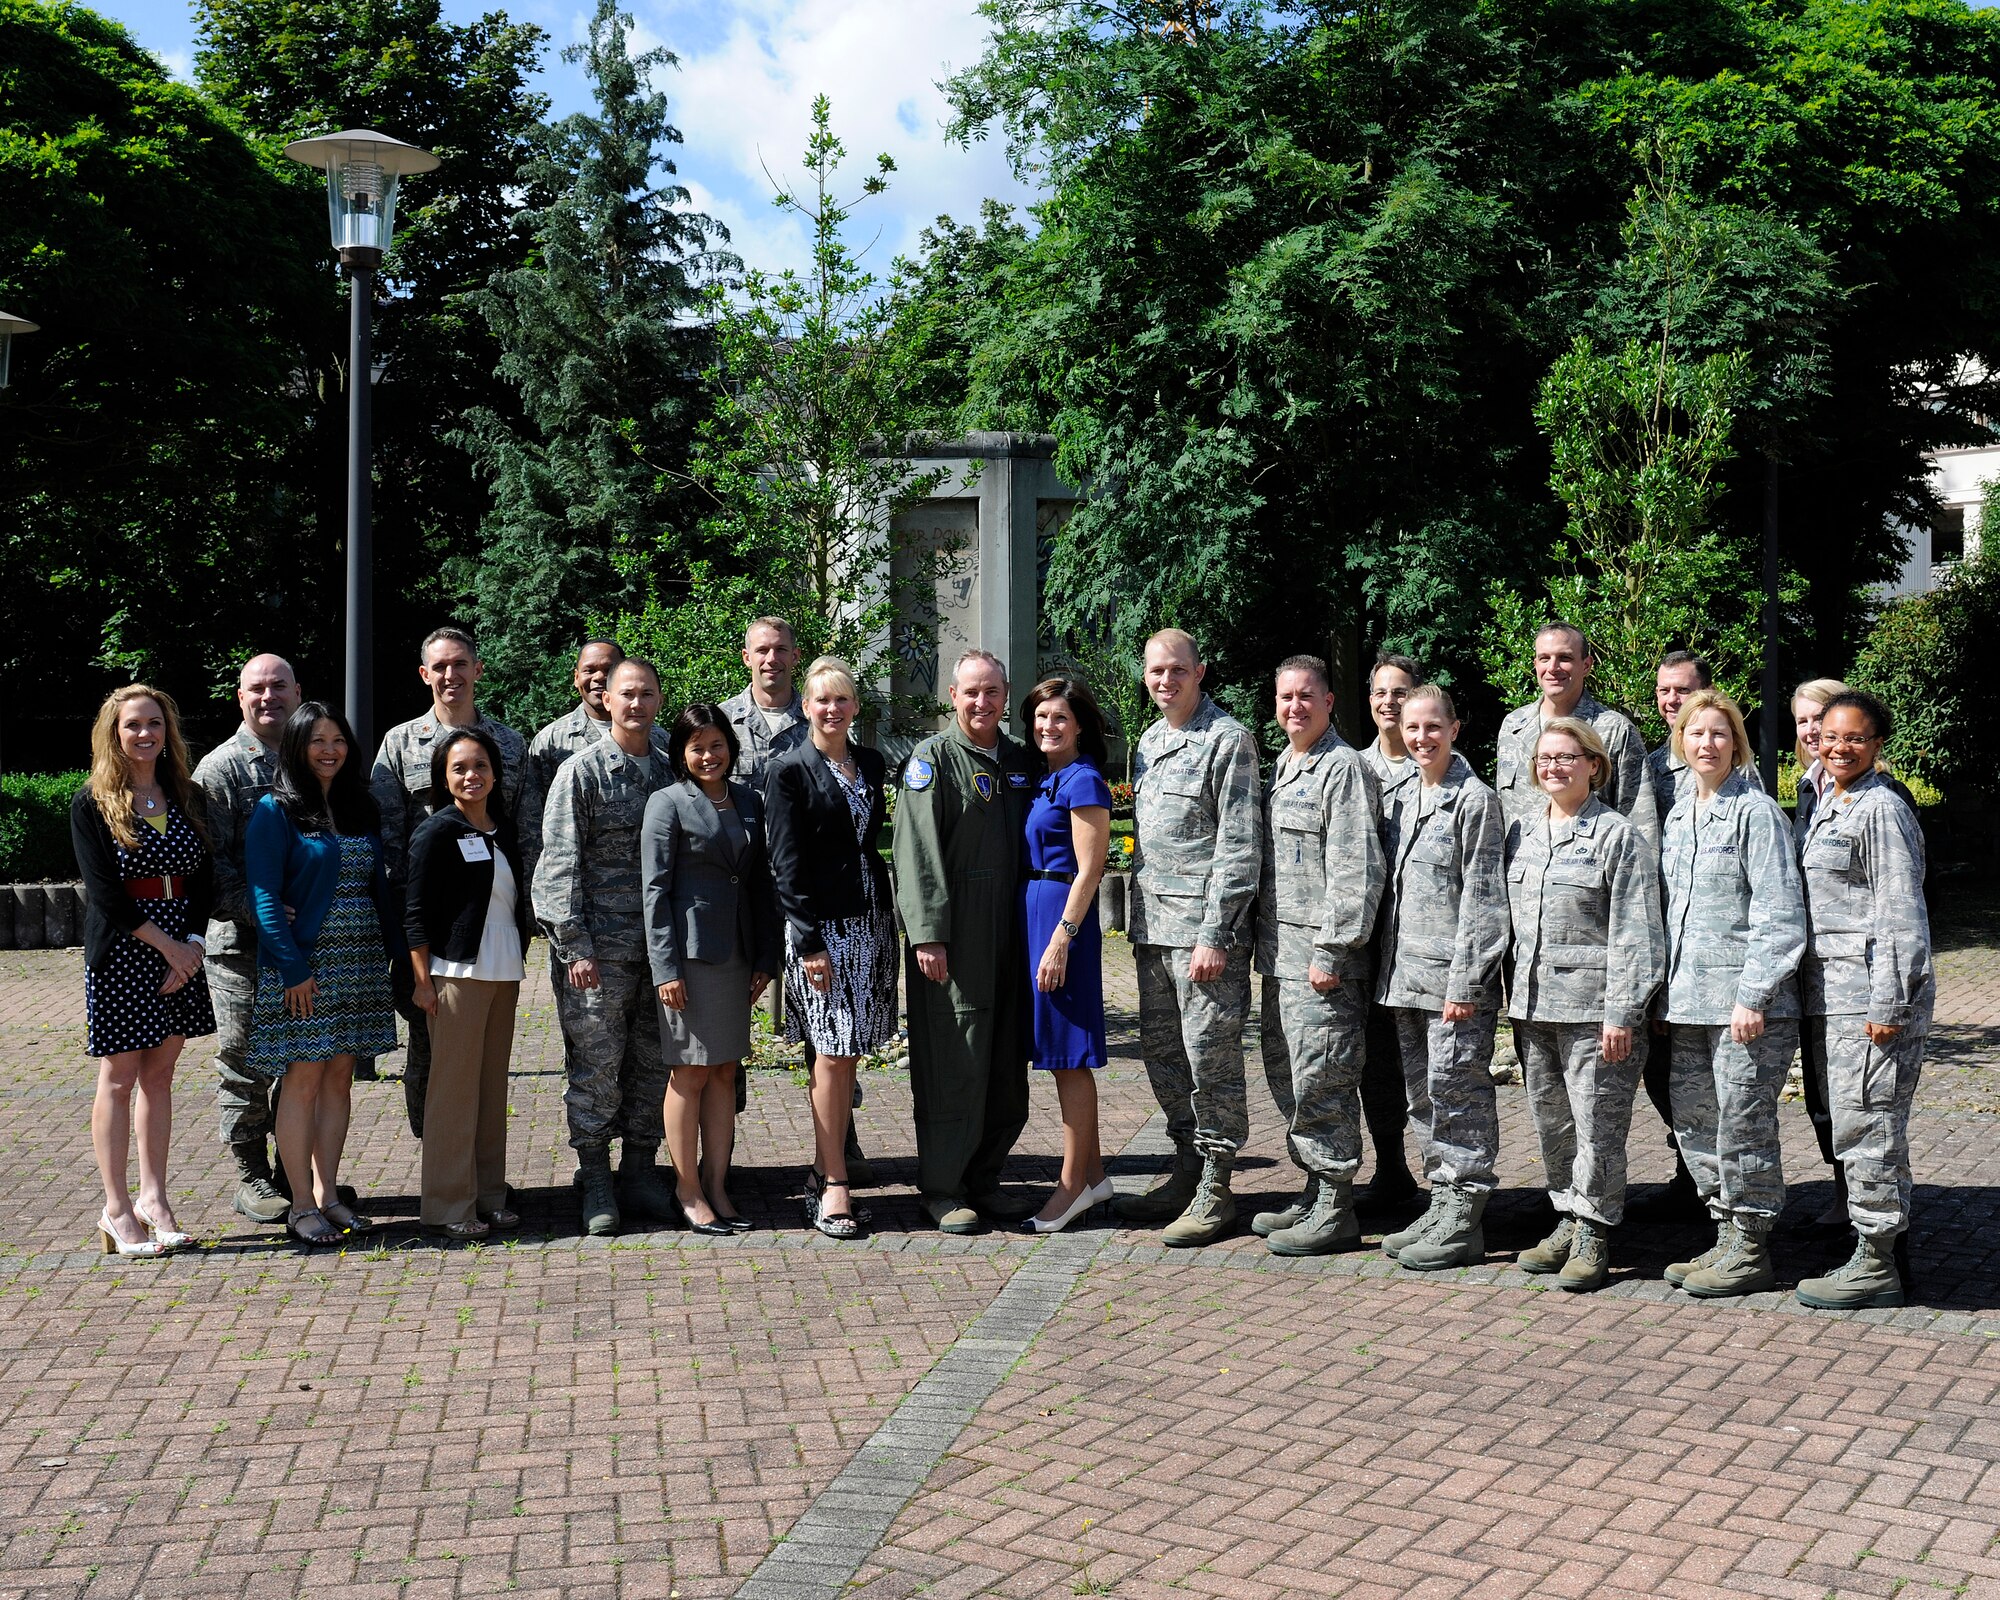 Gen. Mark A. Welsh III, U.S. Air Forces in Europe commander, and his wife Betty, pose with attendees of the USAFE Squadron Commanders’ and Spouses’ seminar held June 18 to 22, 2012, at Ramstein Air Base, Germany. (U.S. Air Force photo by Senior Airman Christopher Willis/Released)